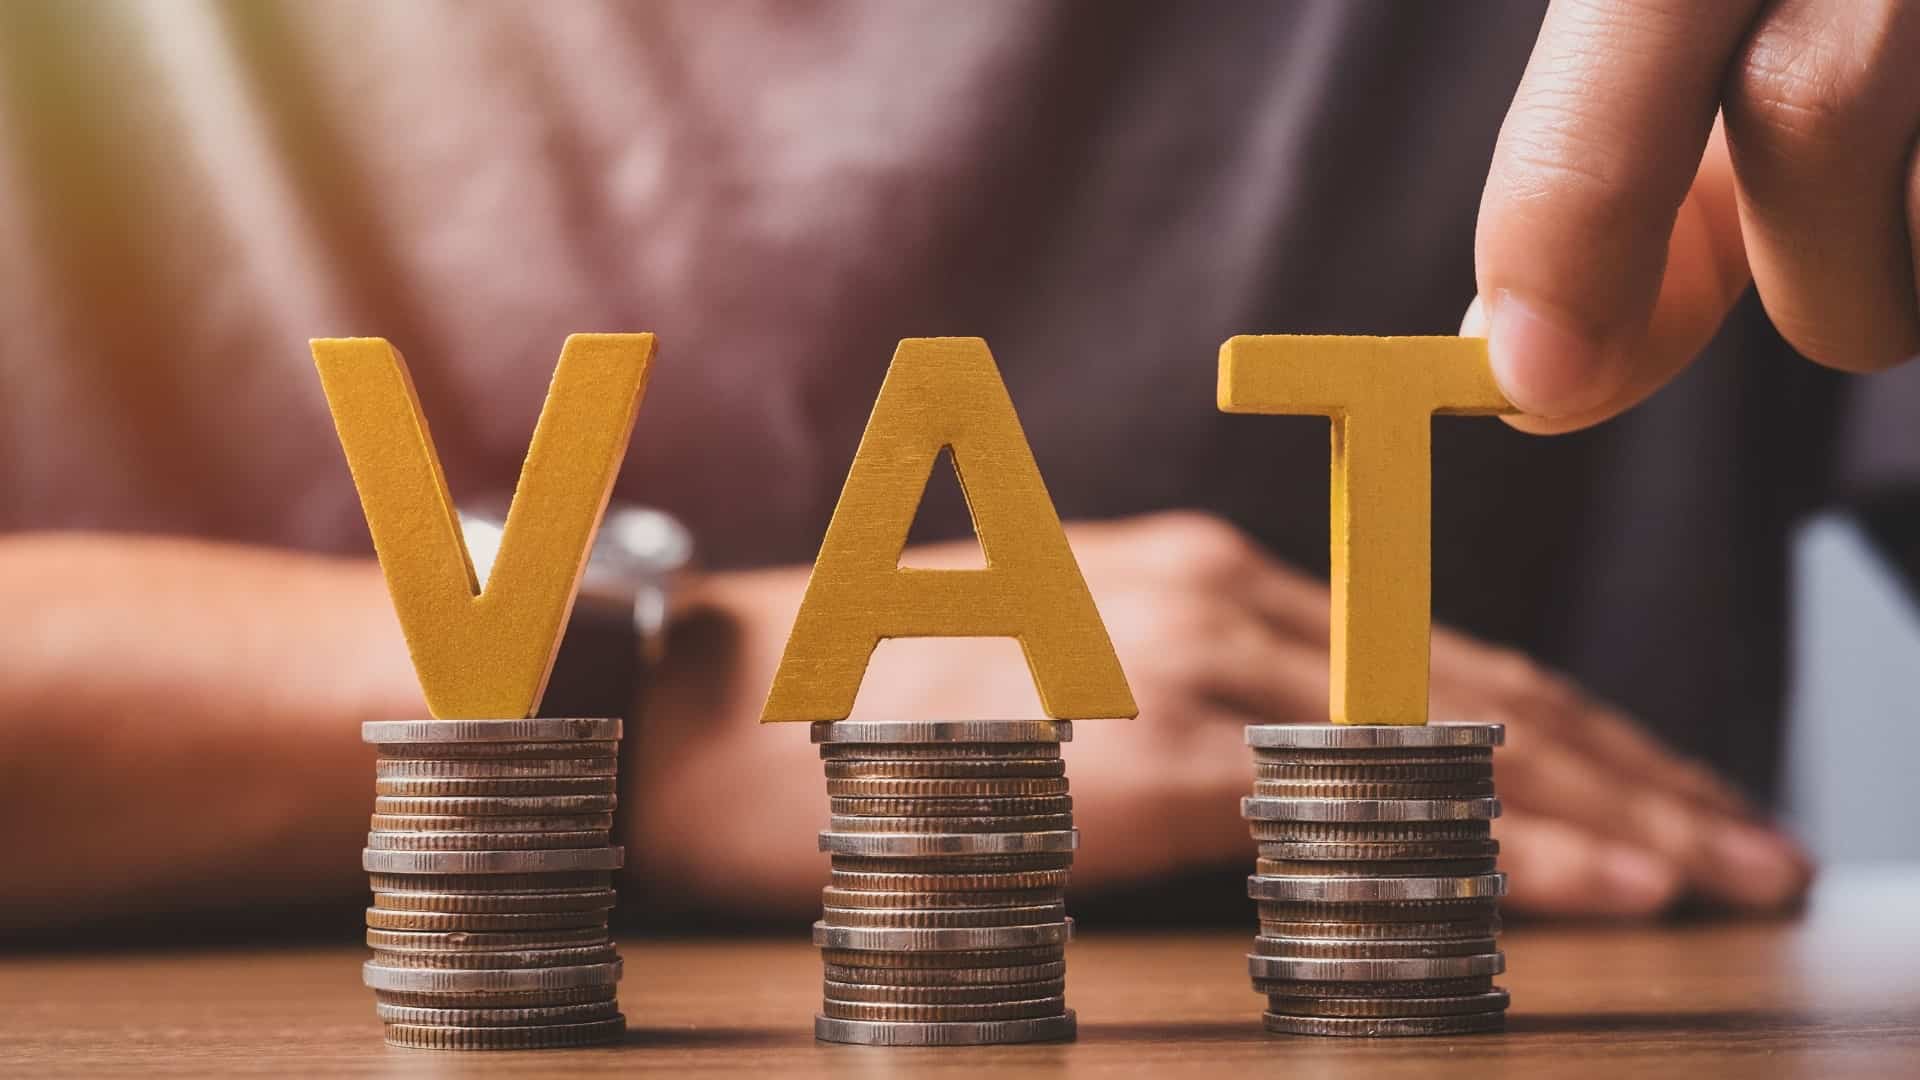 How to Register a Company for VAT in Dubai